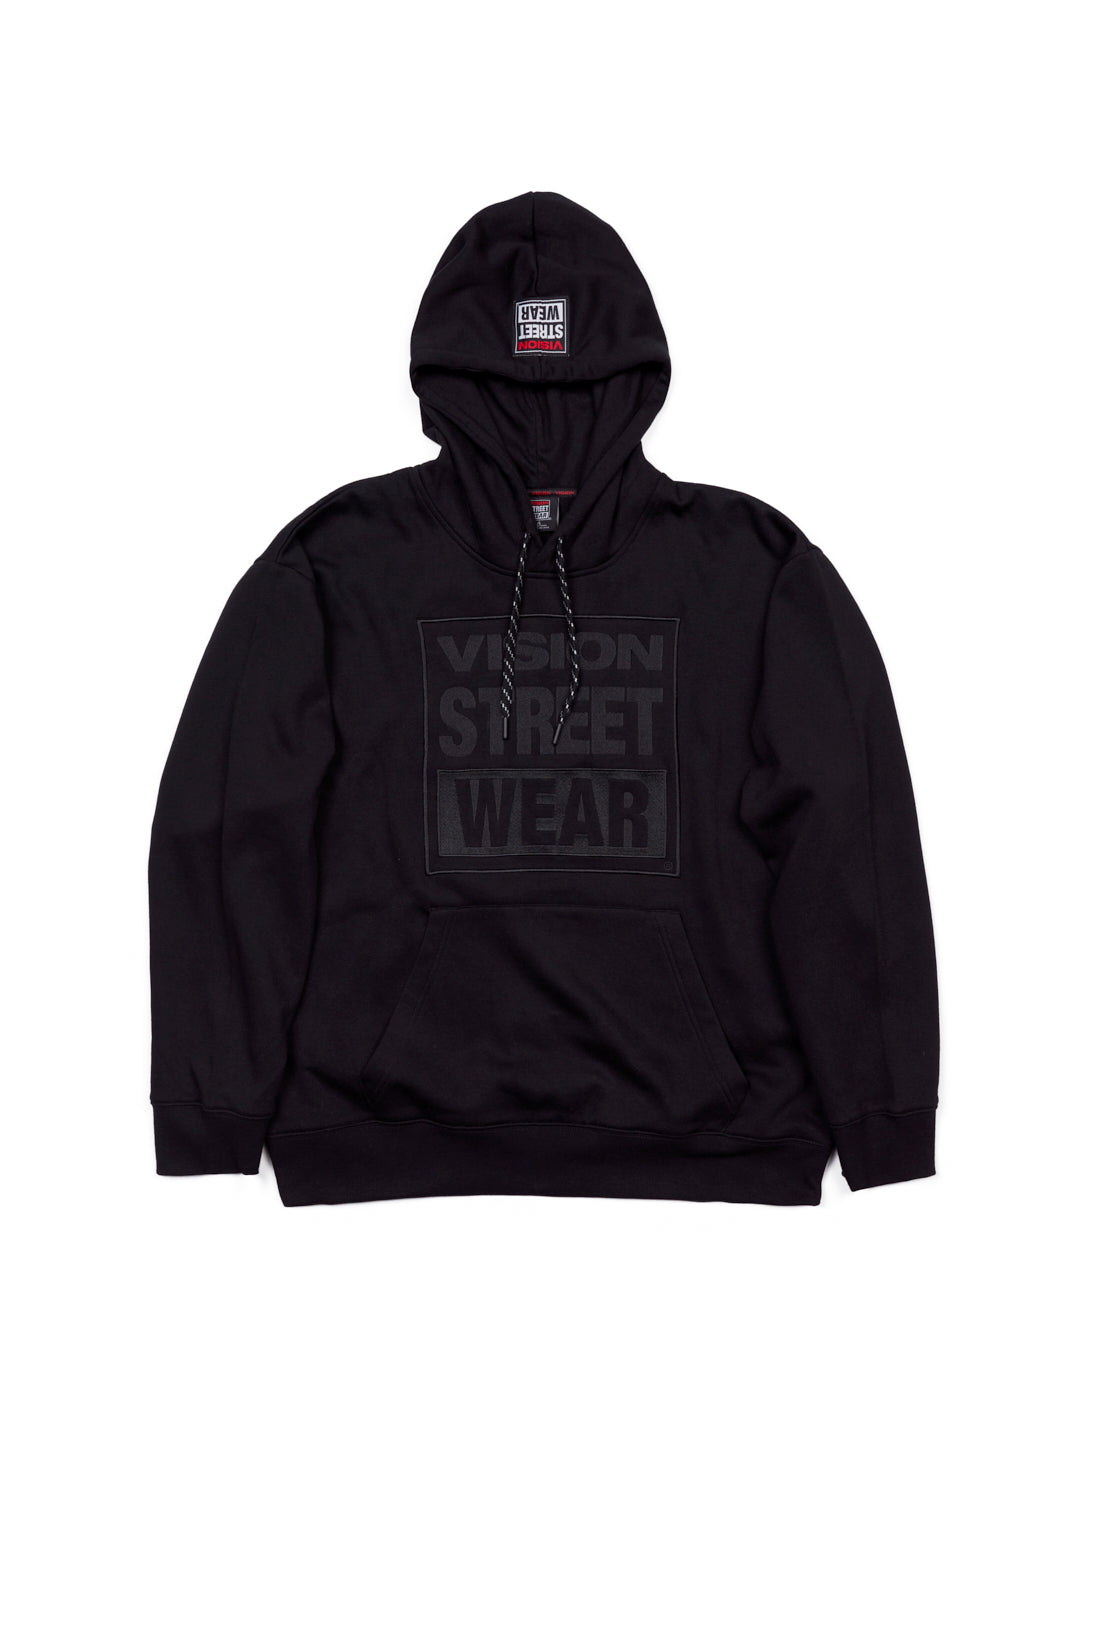 Front Embroided Logo Hoodie - Black - DENIM SOCIETY™